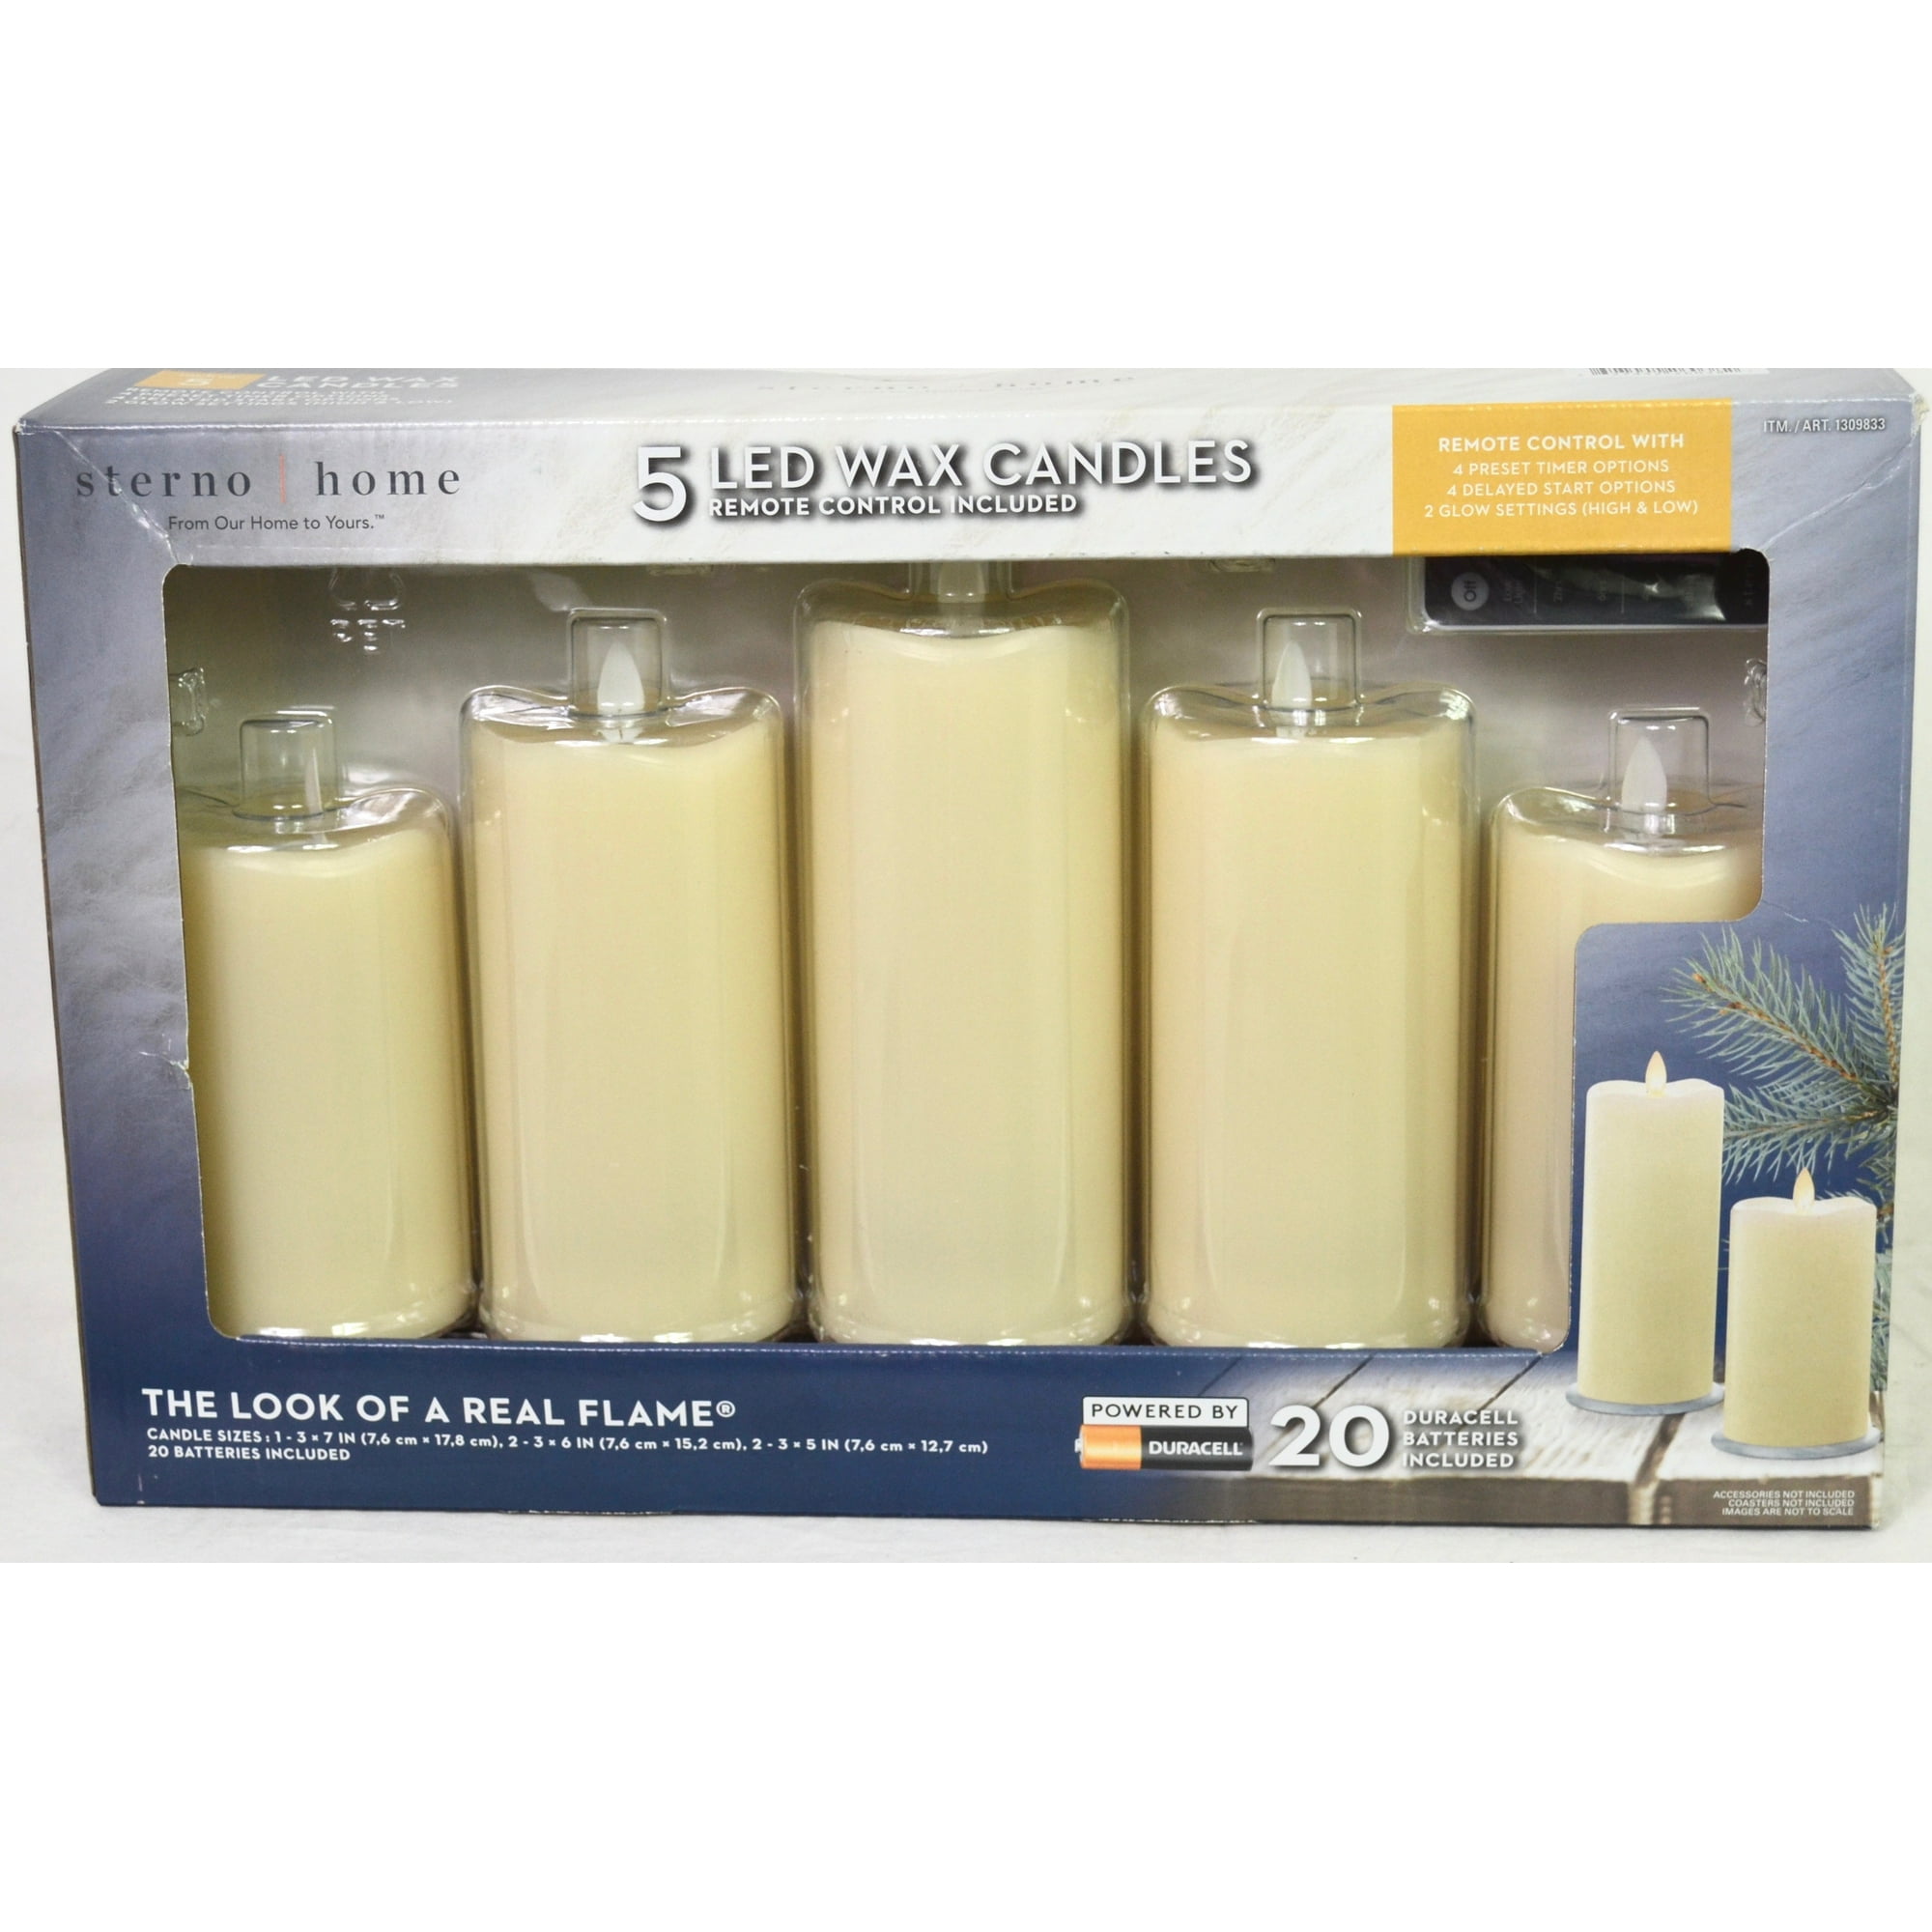 Sterno Home Set of 5 LED Flameless Wax Candles with Remote Control 